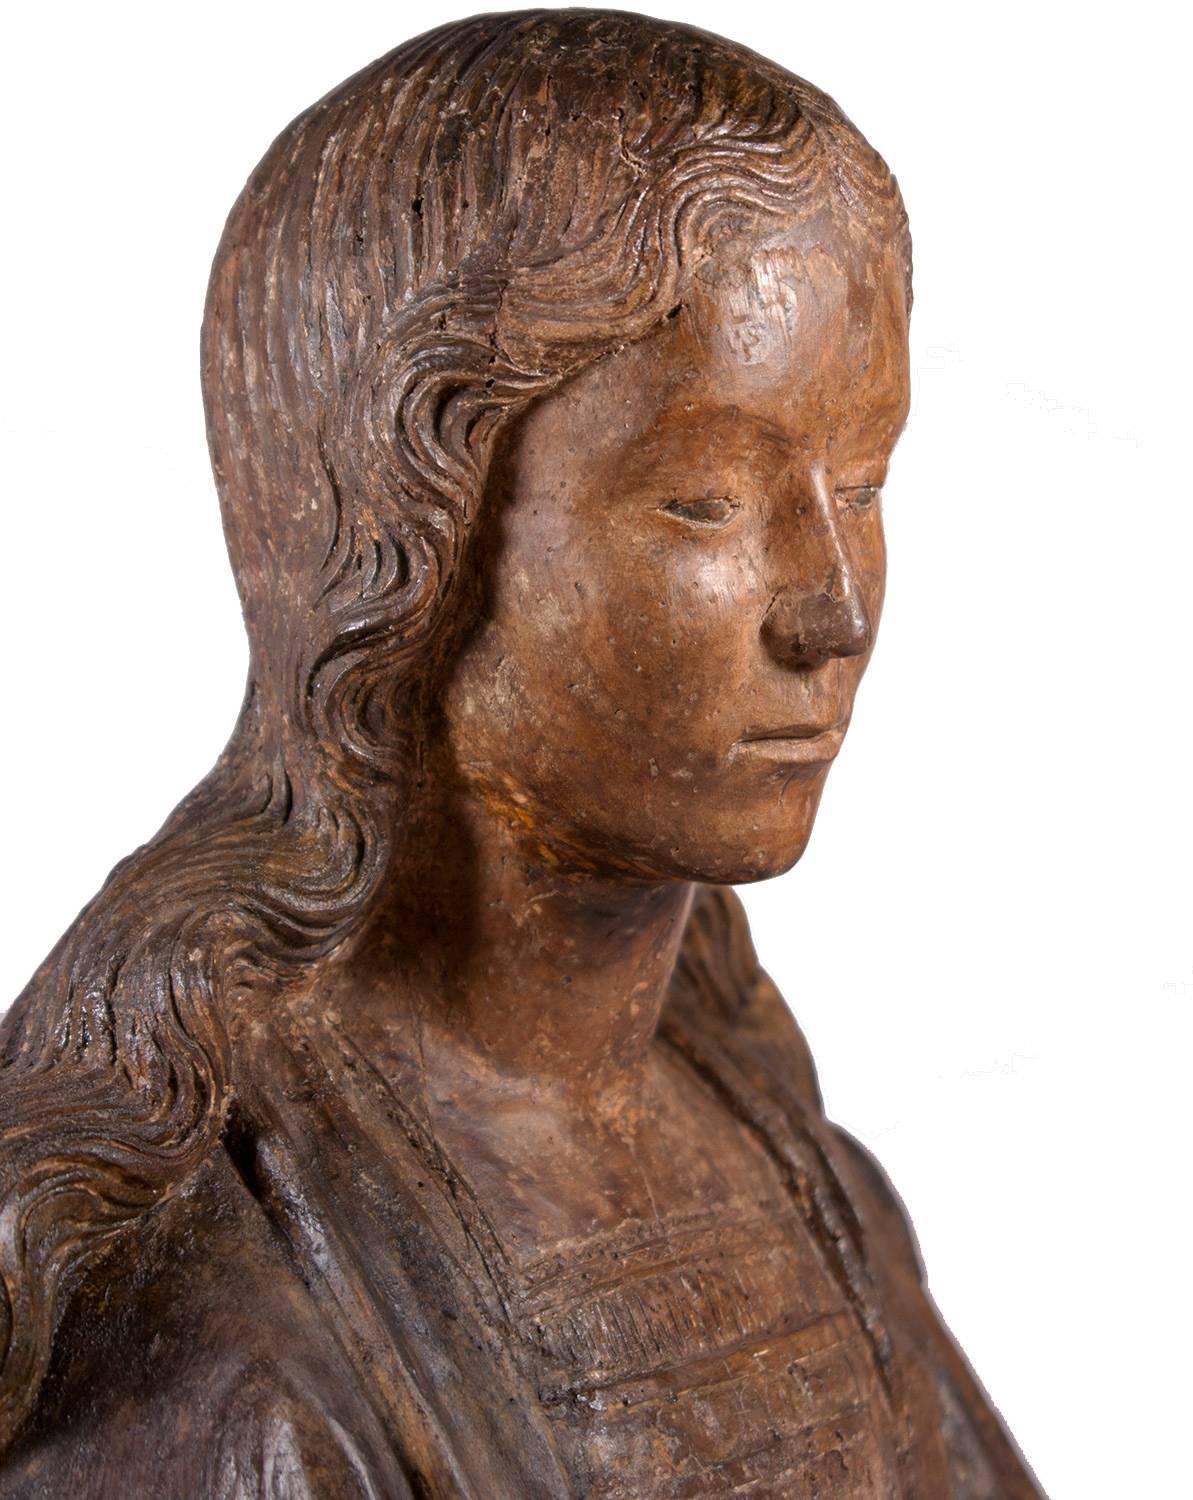 This beautiful bust of a woman dates back to the junction of the late Gothic and the Renaissance. From the late Gothic, it receives the beautiful pictorial effect of curly hairs, and the realism of the face ; from the Renaissance, the classical